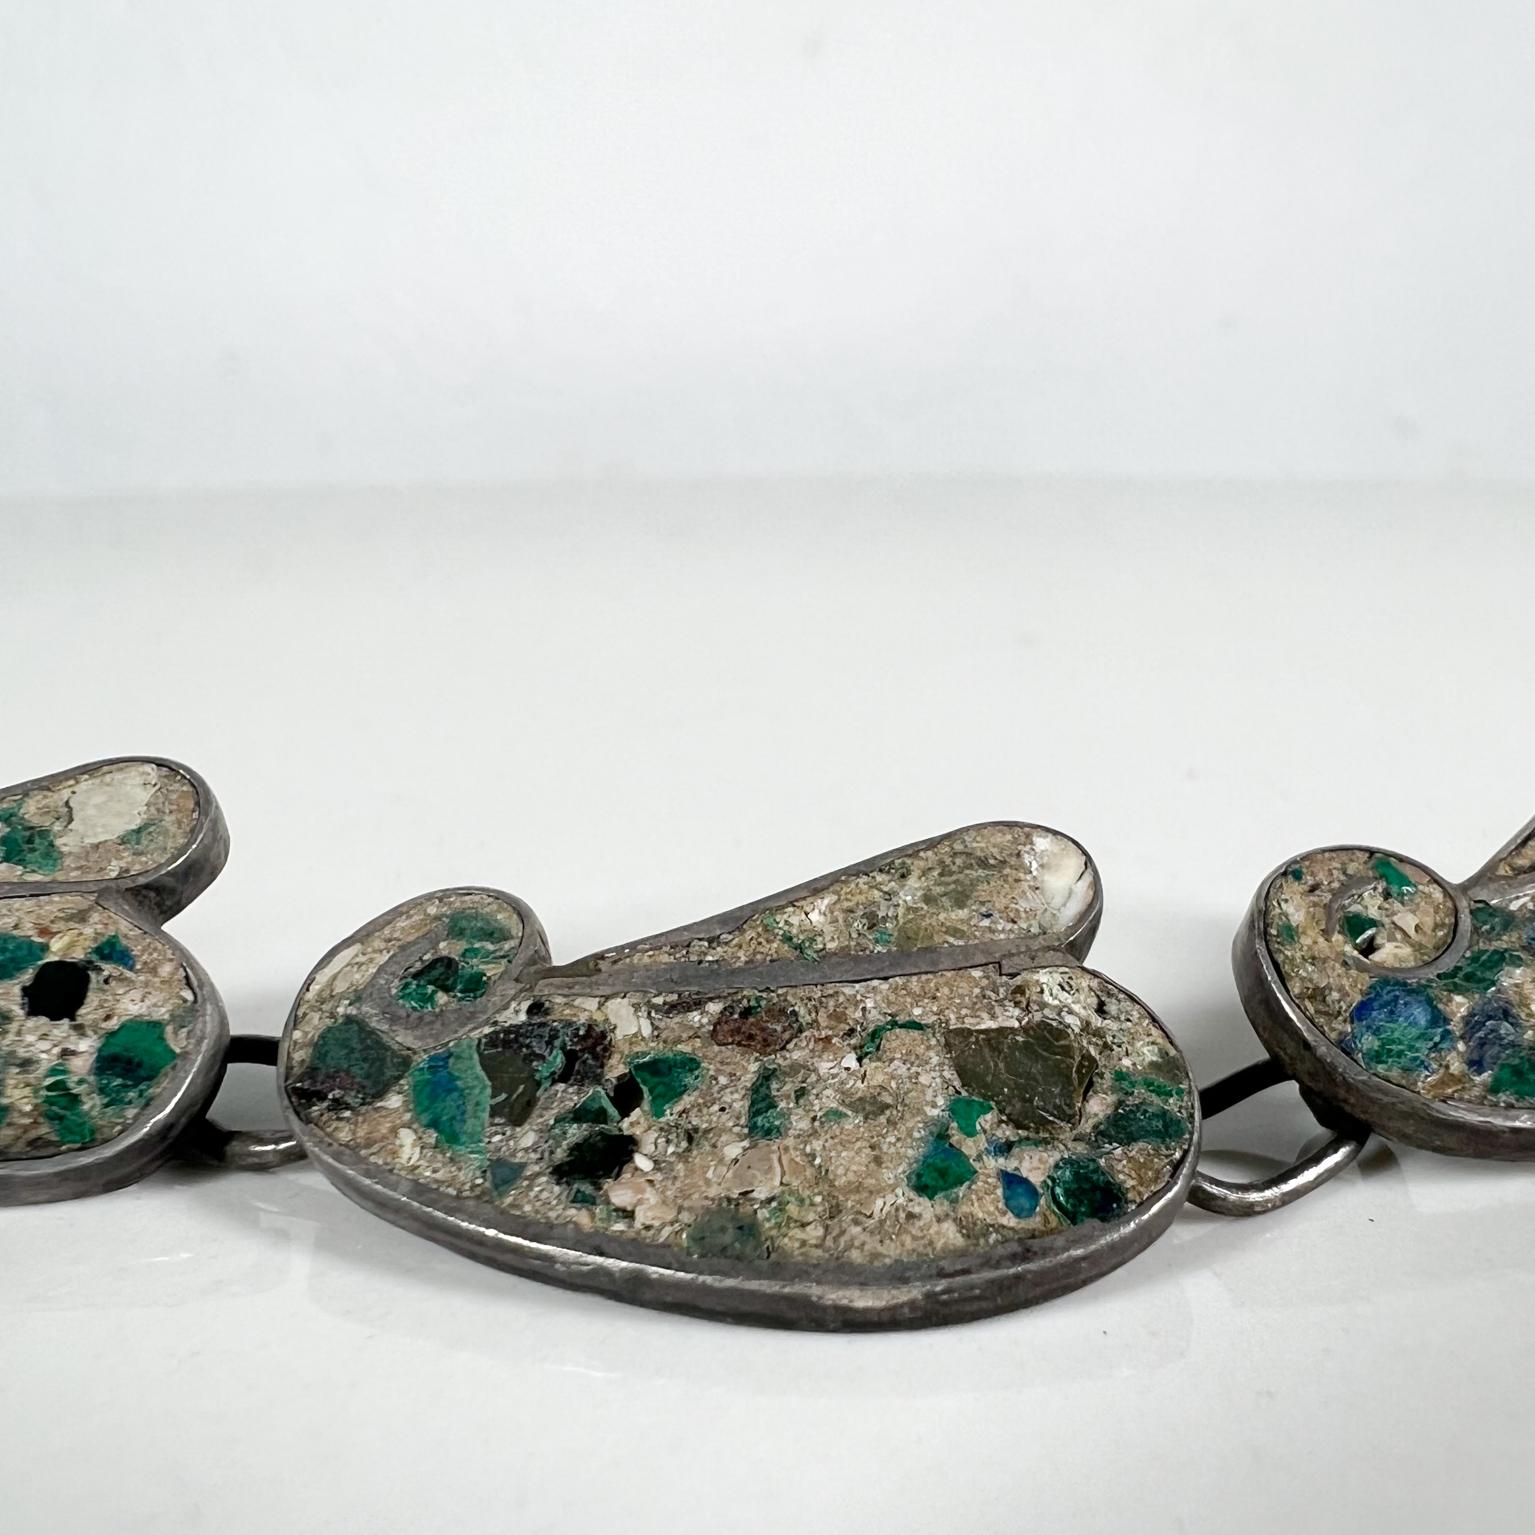 Late 20th Century 1970s Modernist Mexican Sterling Silver and Malachite Link Bracelet Taxco Mexico For Sale